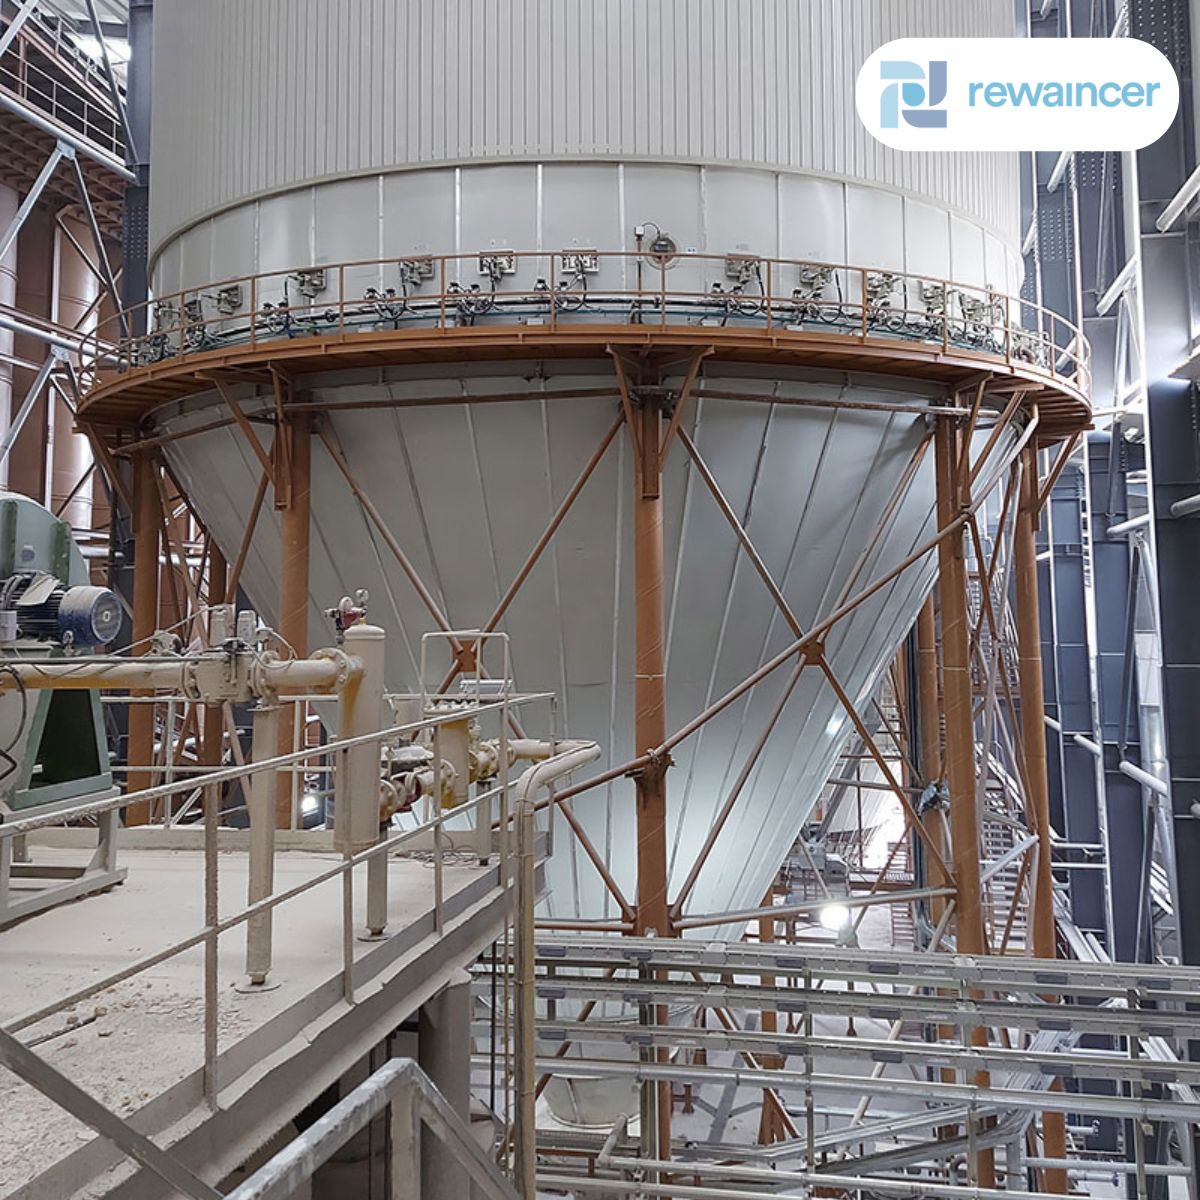 The water regenerated in LIFE REWAINCER ♻️ will be used in the atomization process, a process in the ceramics industry 🏭 for which large quantities of water are consumed.

 #LIFERewaincer #LIFEProgramme #LIFEProject #circulareconomy #savewater #ceramicindustry